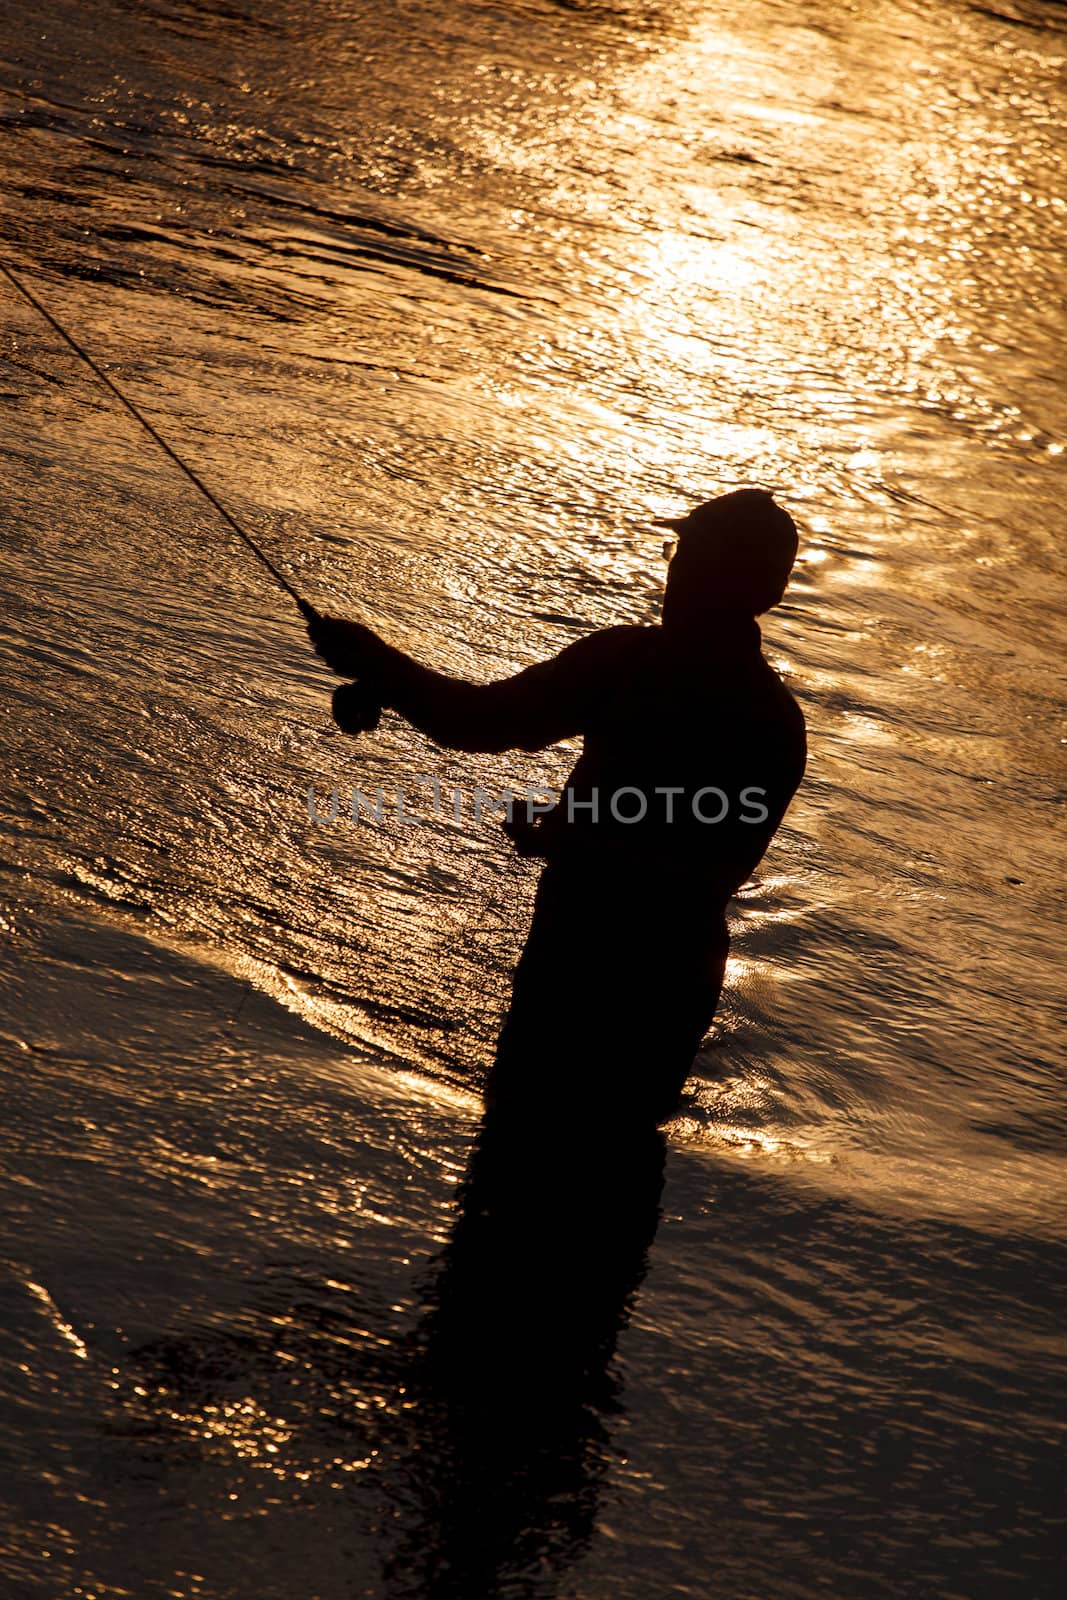 fisherman on the river by shebeko